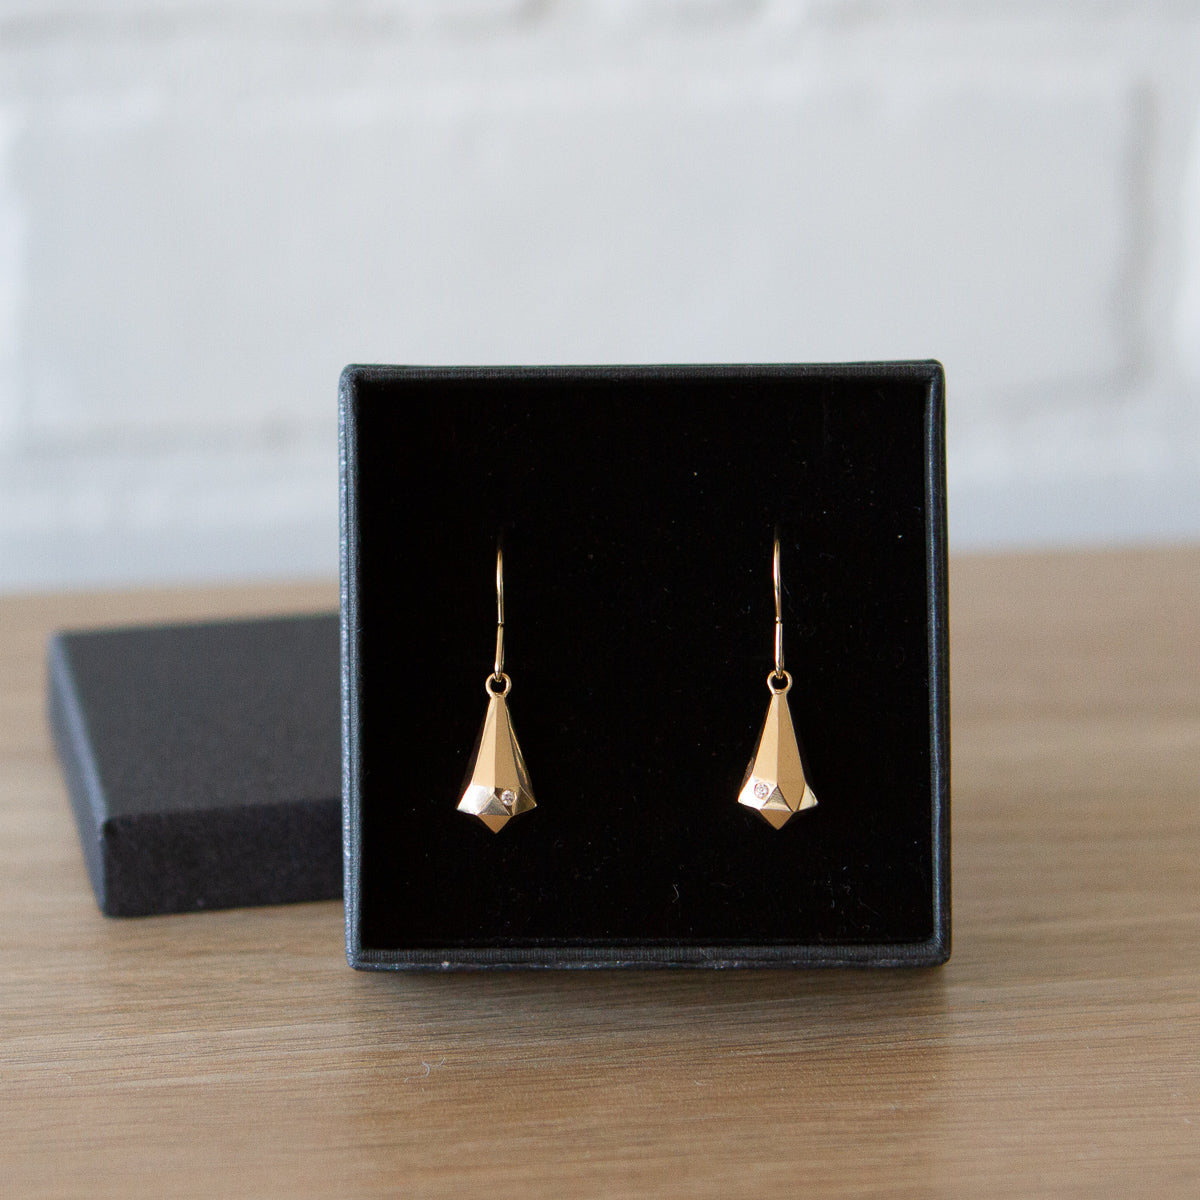 Gold and Diamond Crystal Fragment Earrings in a gift box